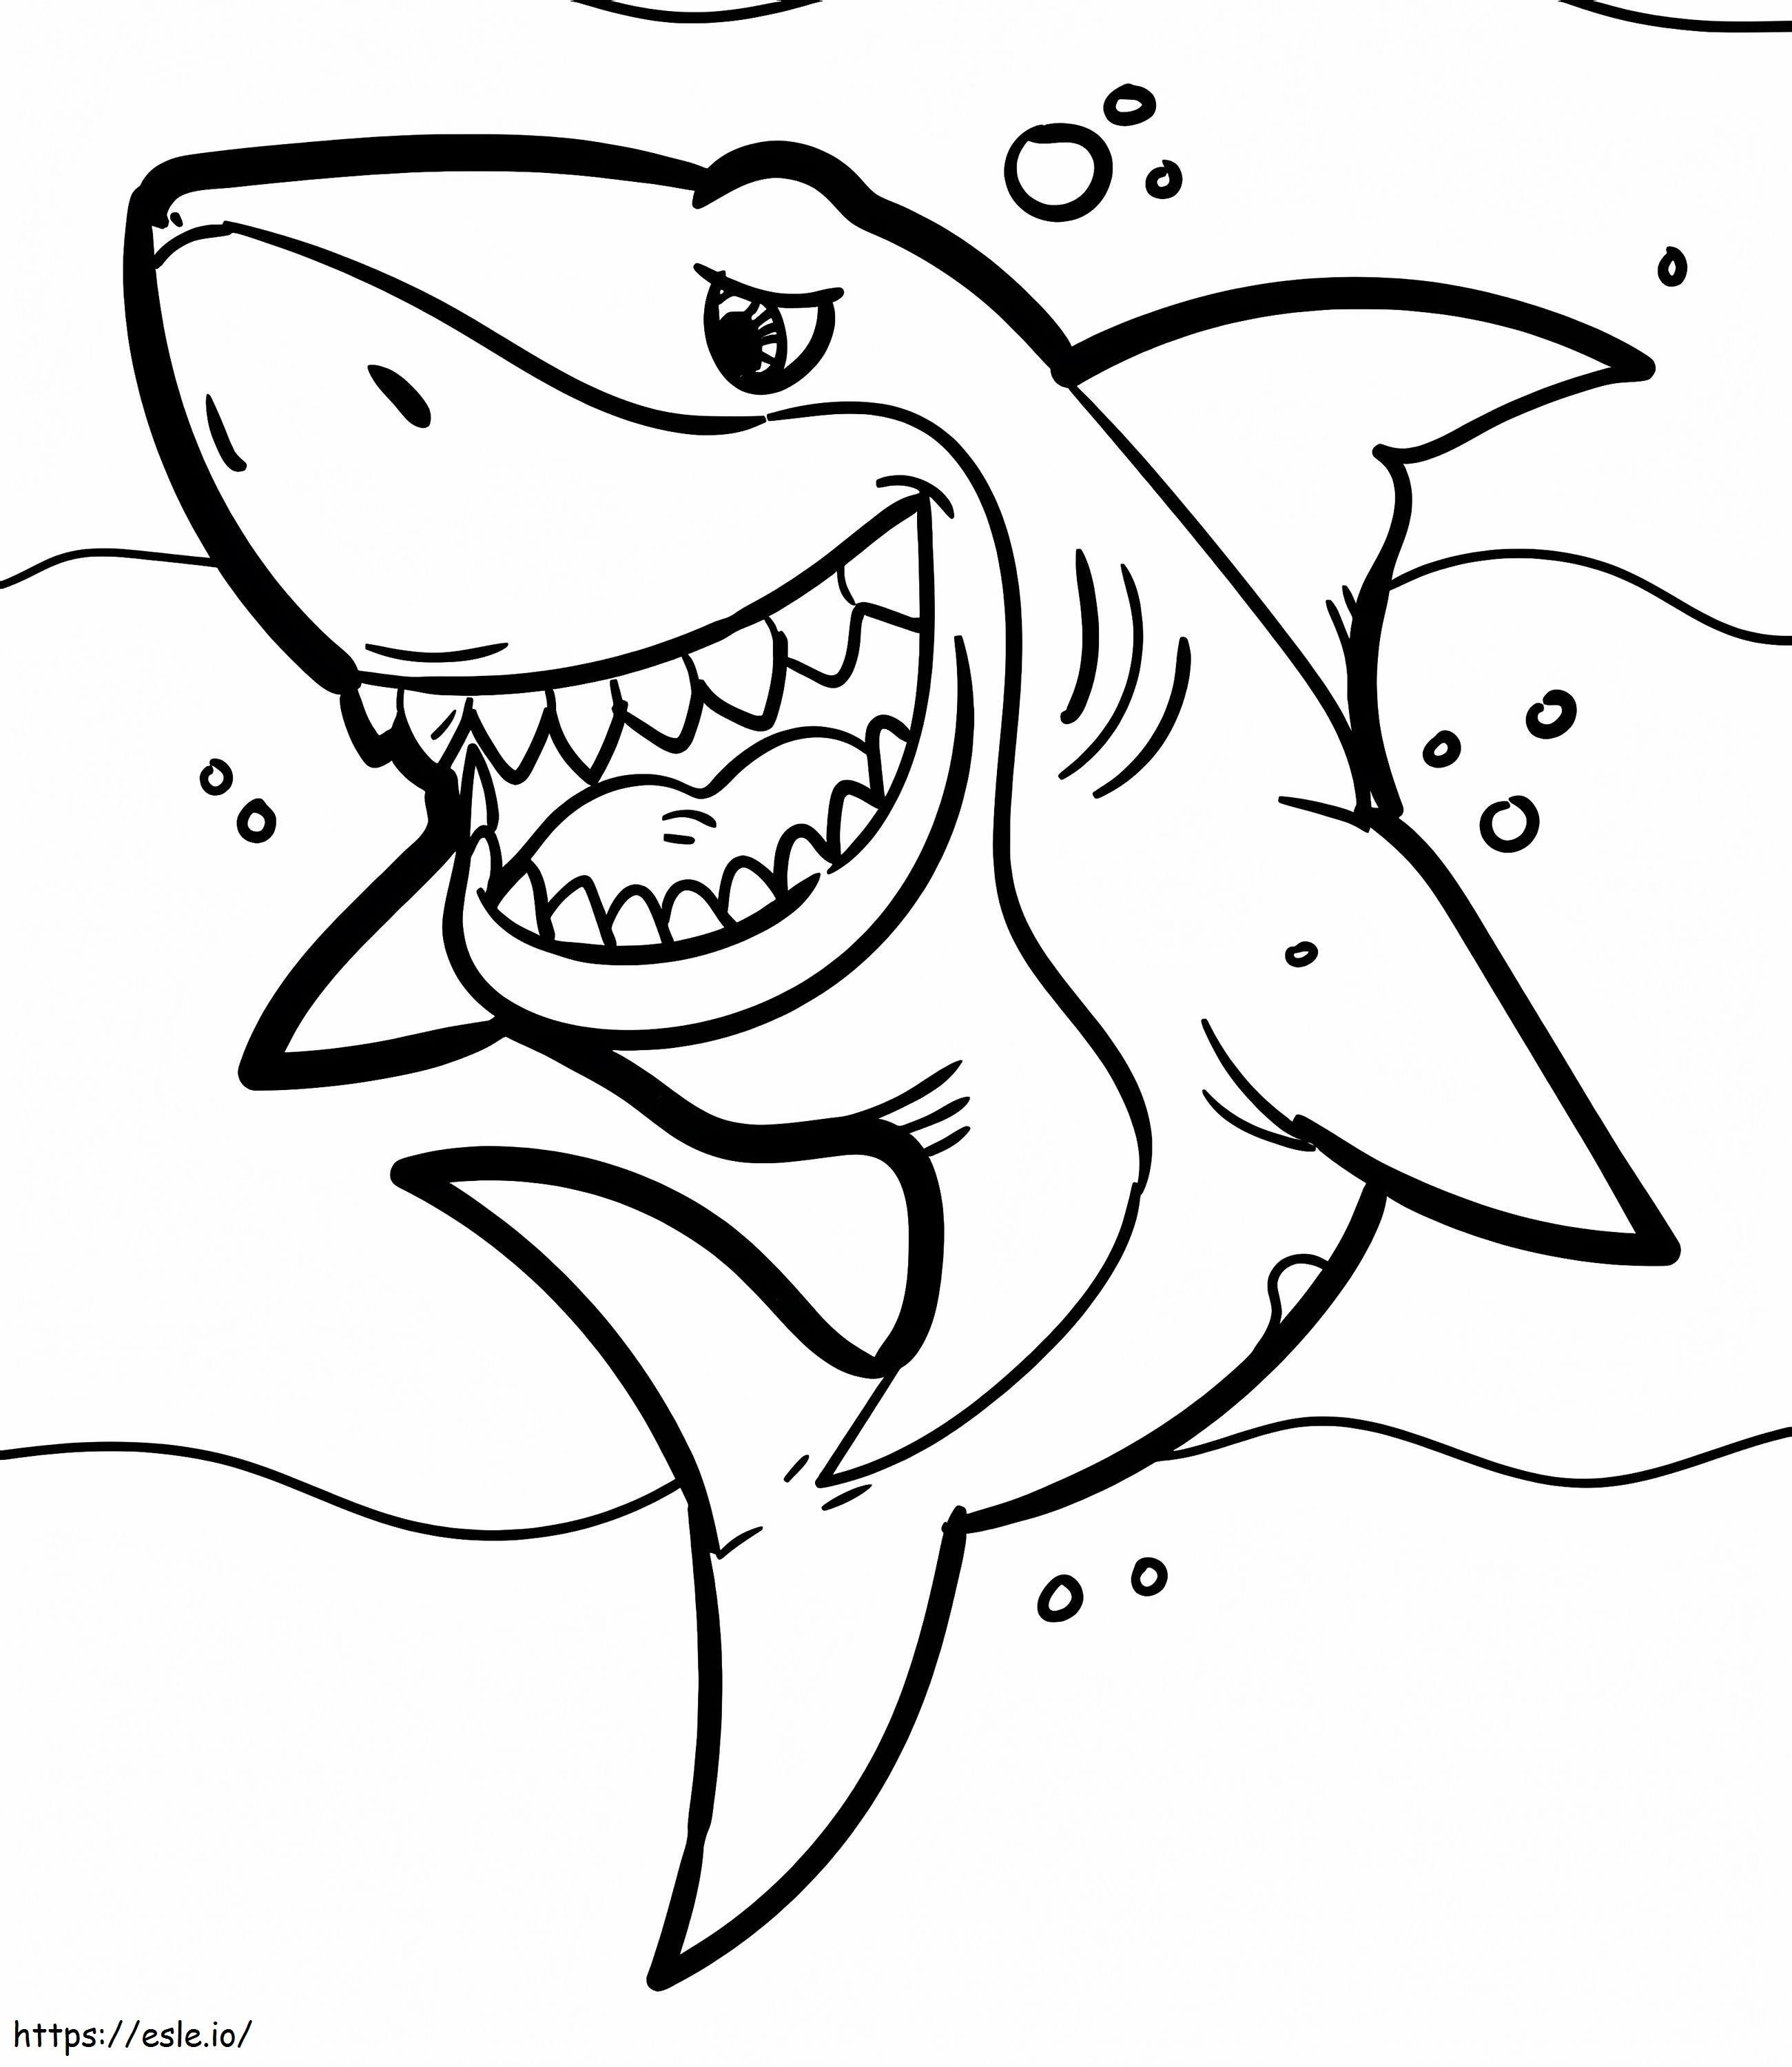 Shark Laughing coloring page